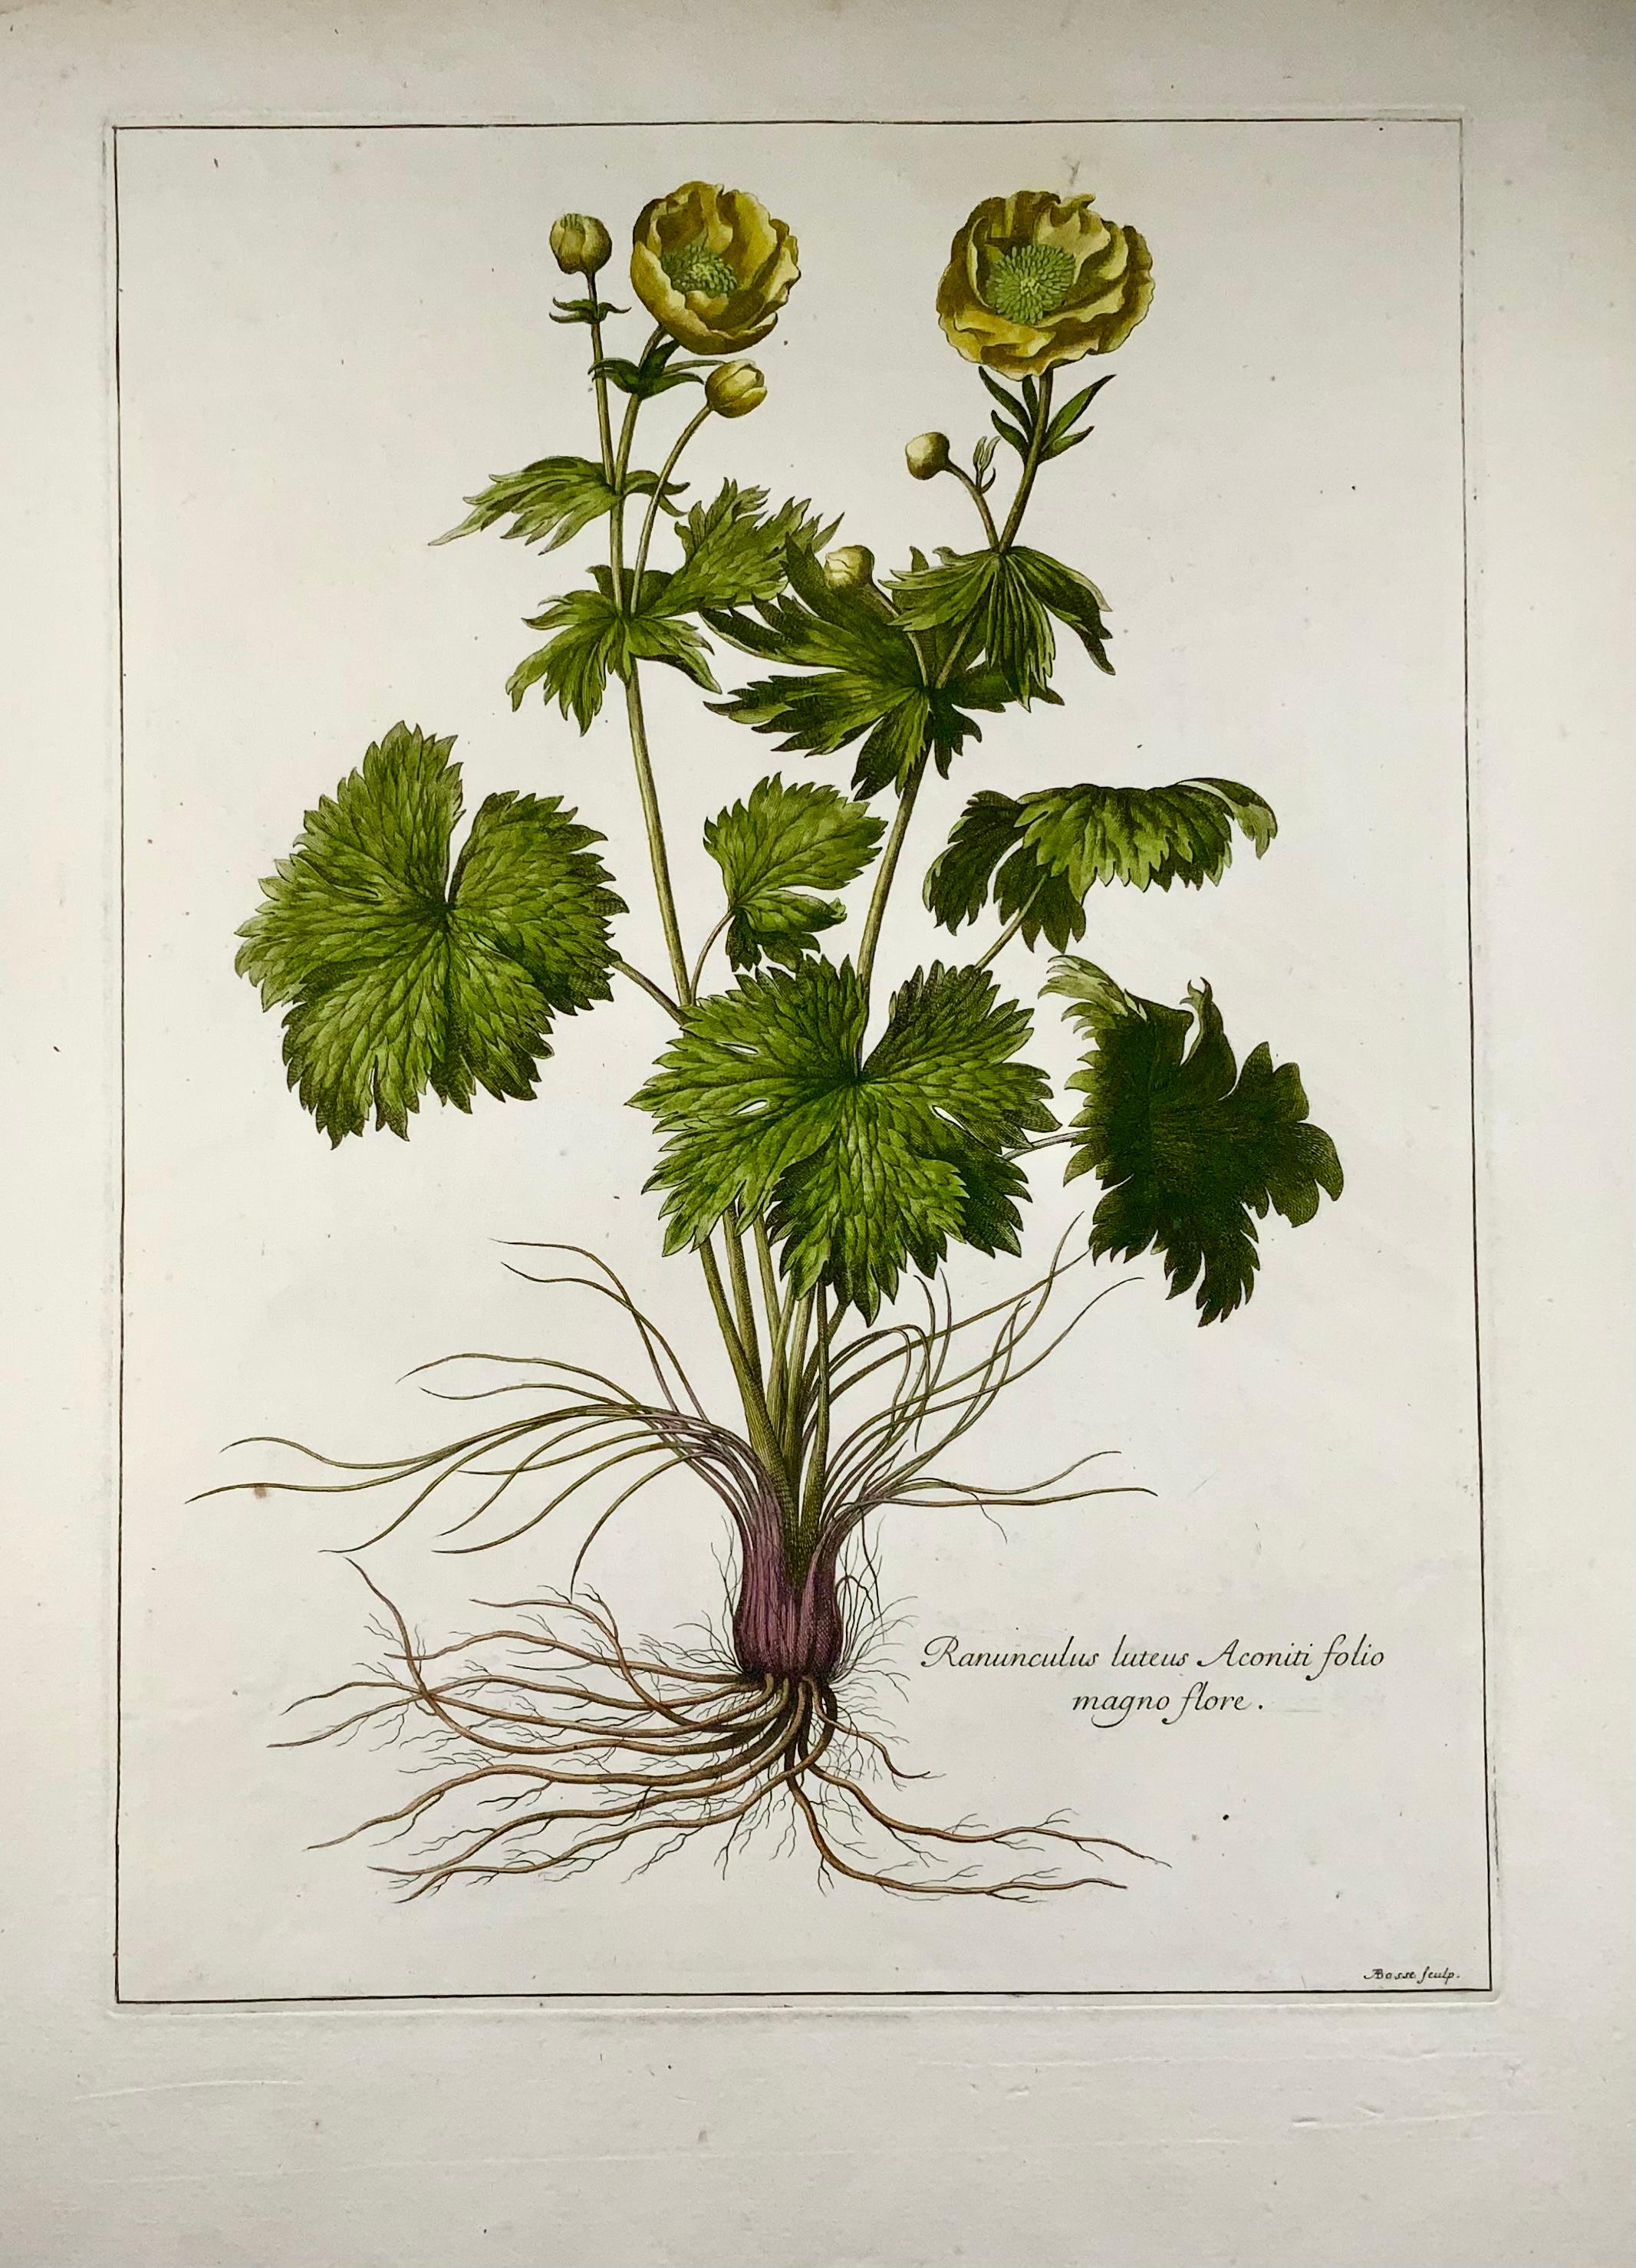 Ranunculus luteus aconiti folio magno flore

After Nicholas Robert (1610-1684), engraved by Abraham Bosse (c. 1604 – 14 February 1676). On fine watermarked, laid paper.

Imperial folio. Platemarks each approx. 450 x 300 mm. (15 3/4 x 11 3/4 in),